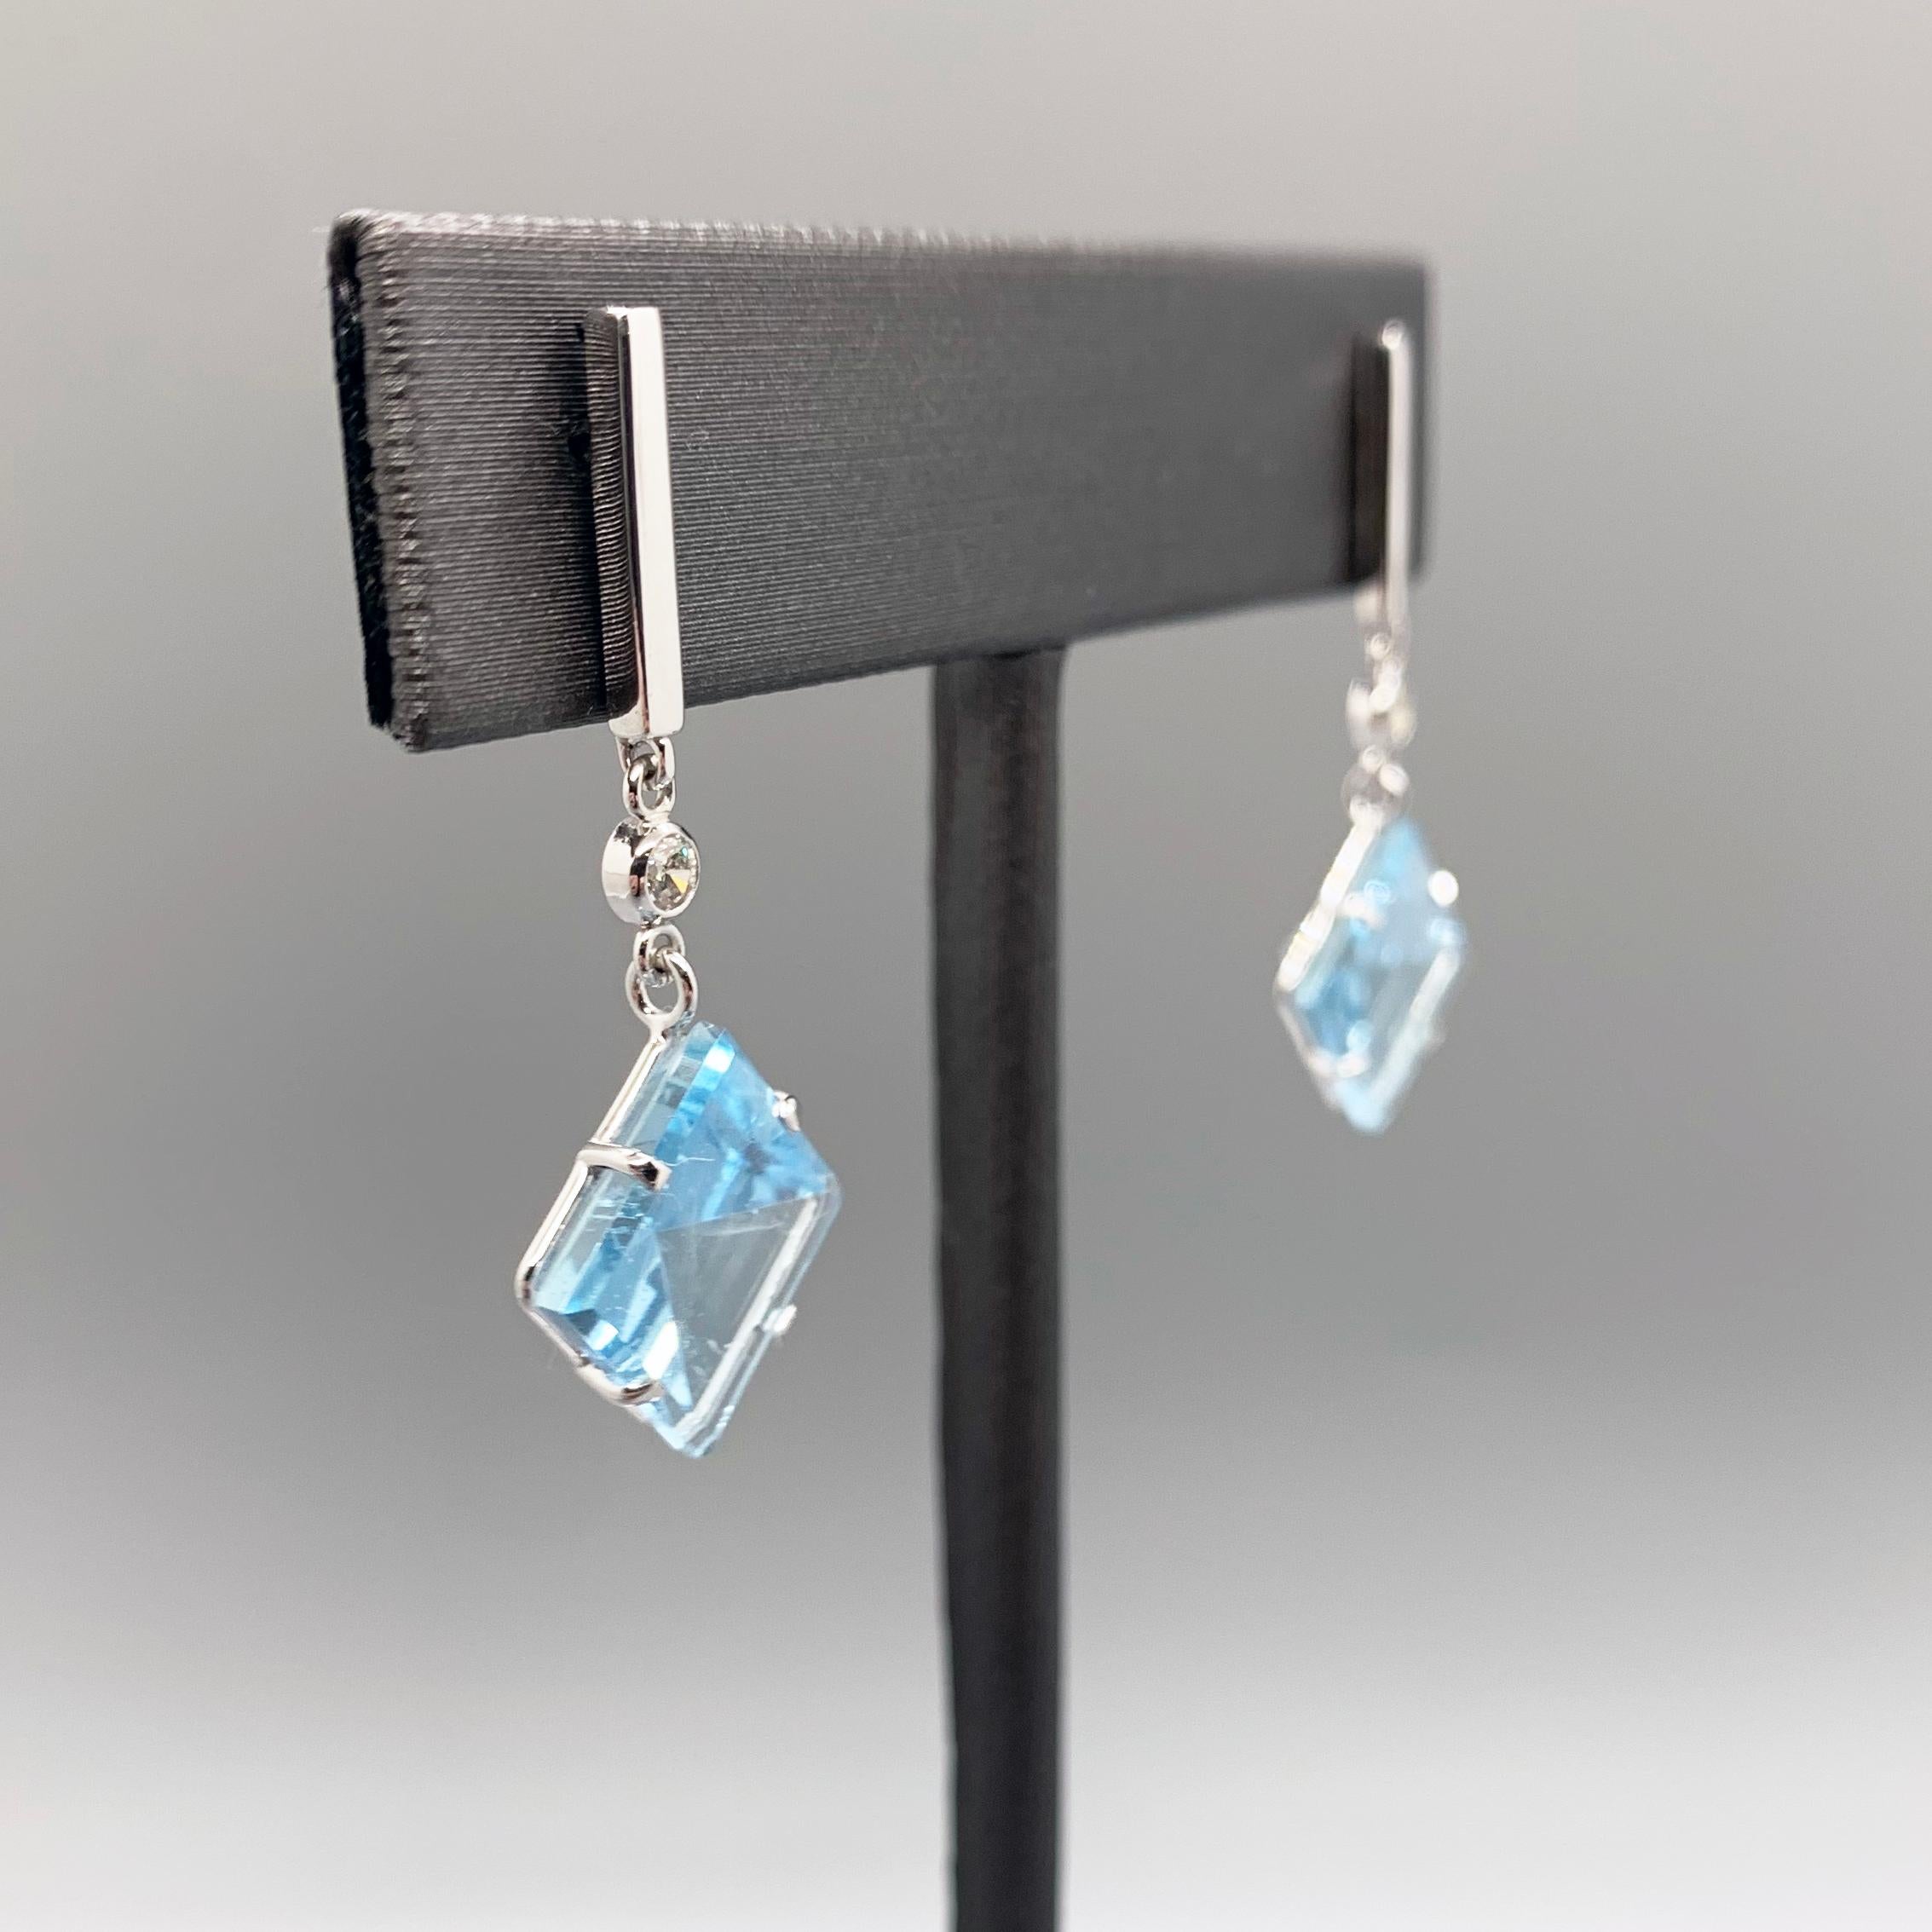 This earring set was designed to highlight the geometric beauty of it's center piece: a pair of mirror cut aquamarines with a 7.88 total carat weight. The mirror cut plays up the gemstones' natural refractive properties, creating an interesting